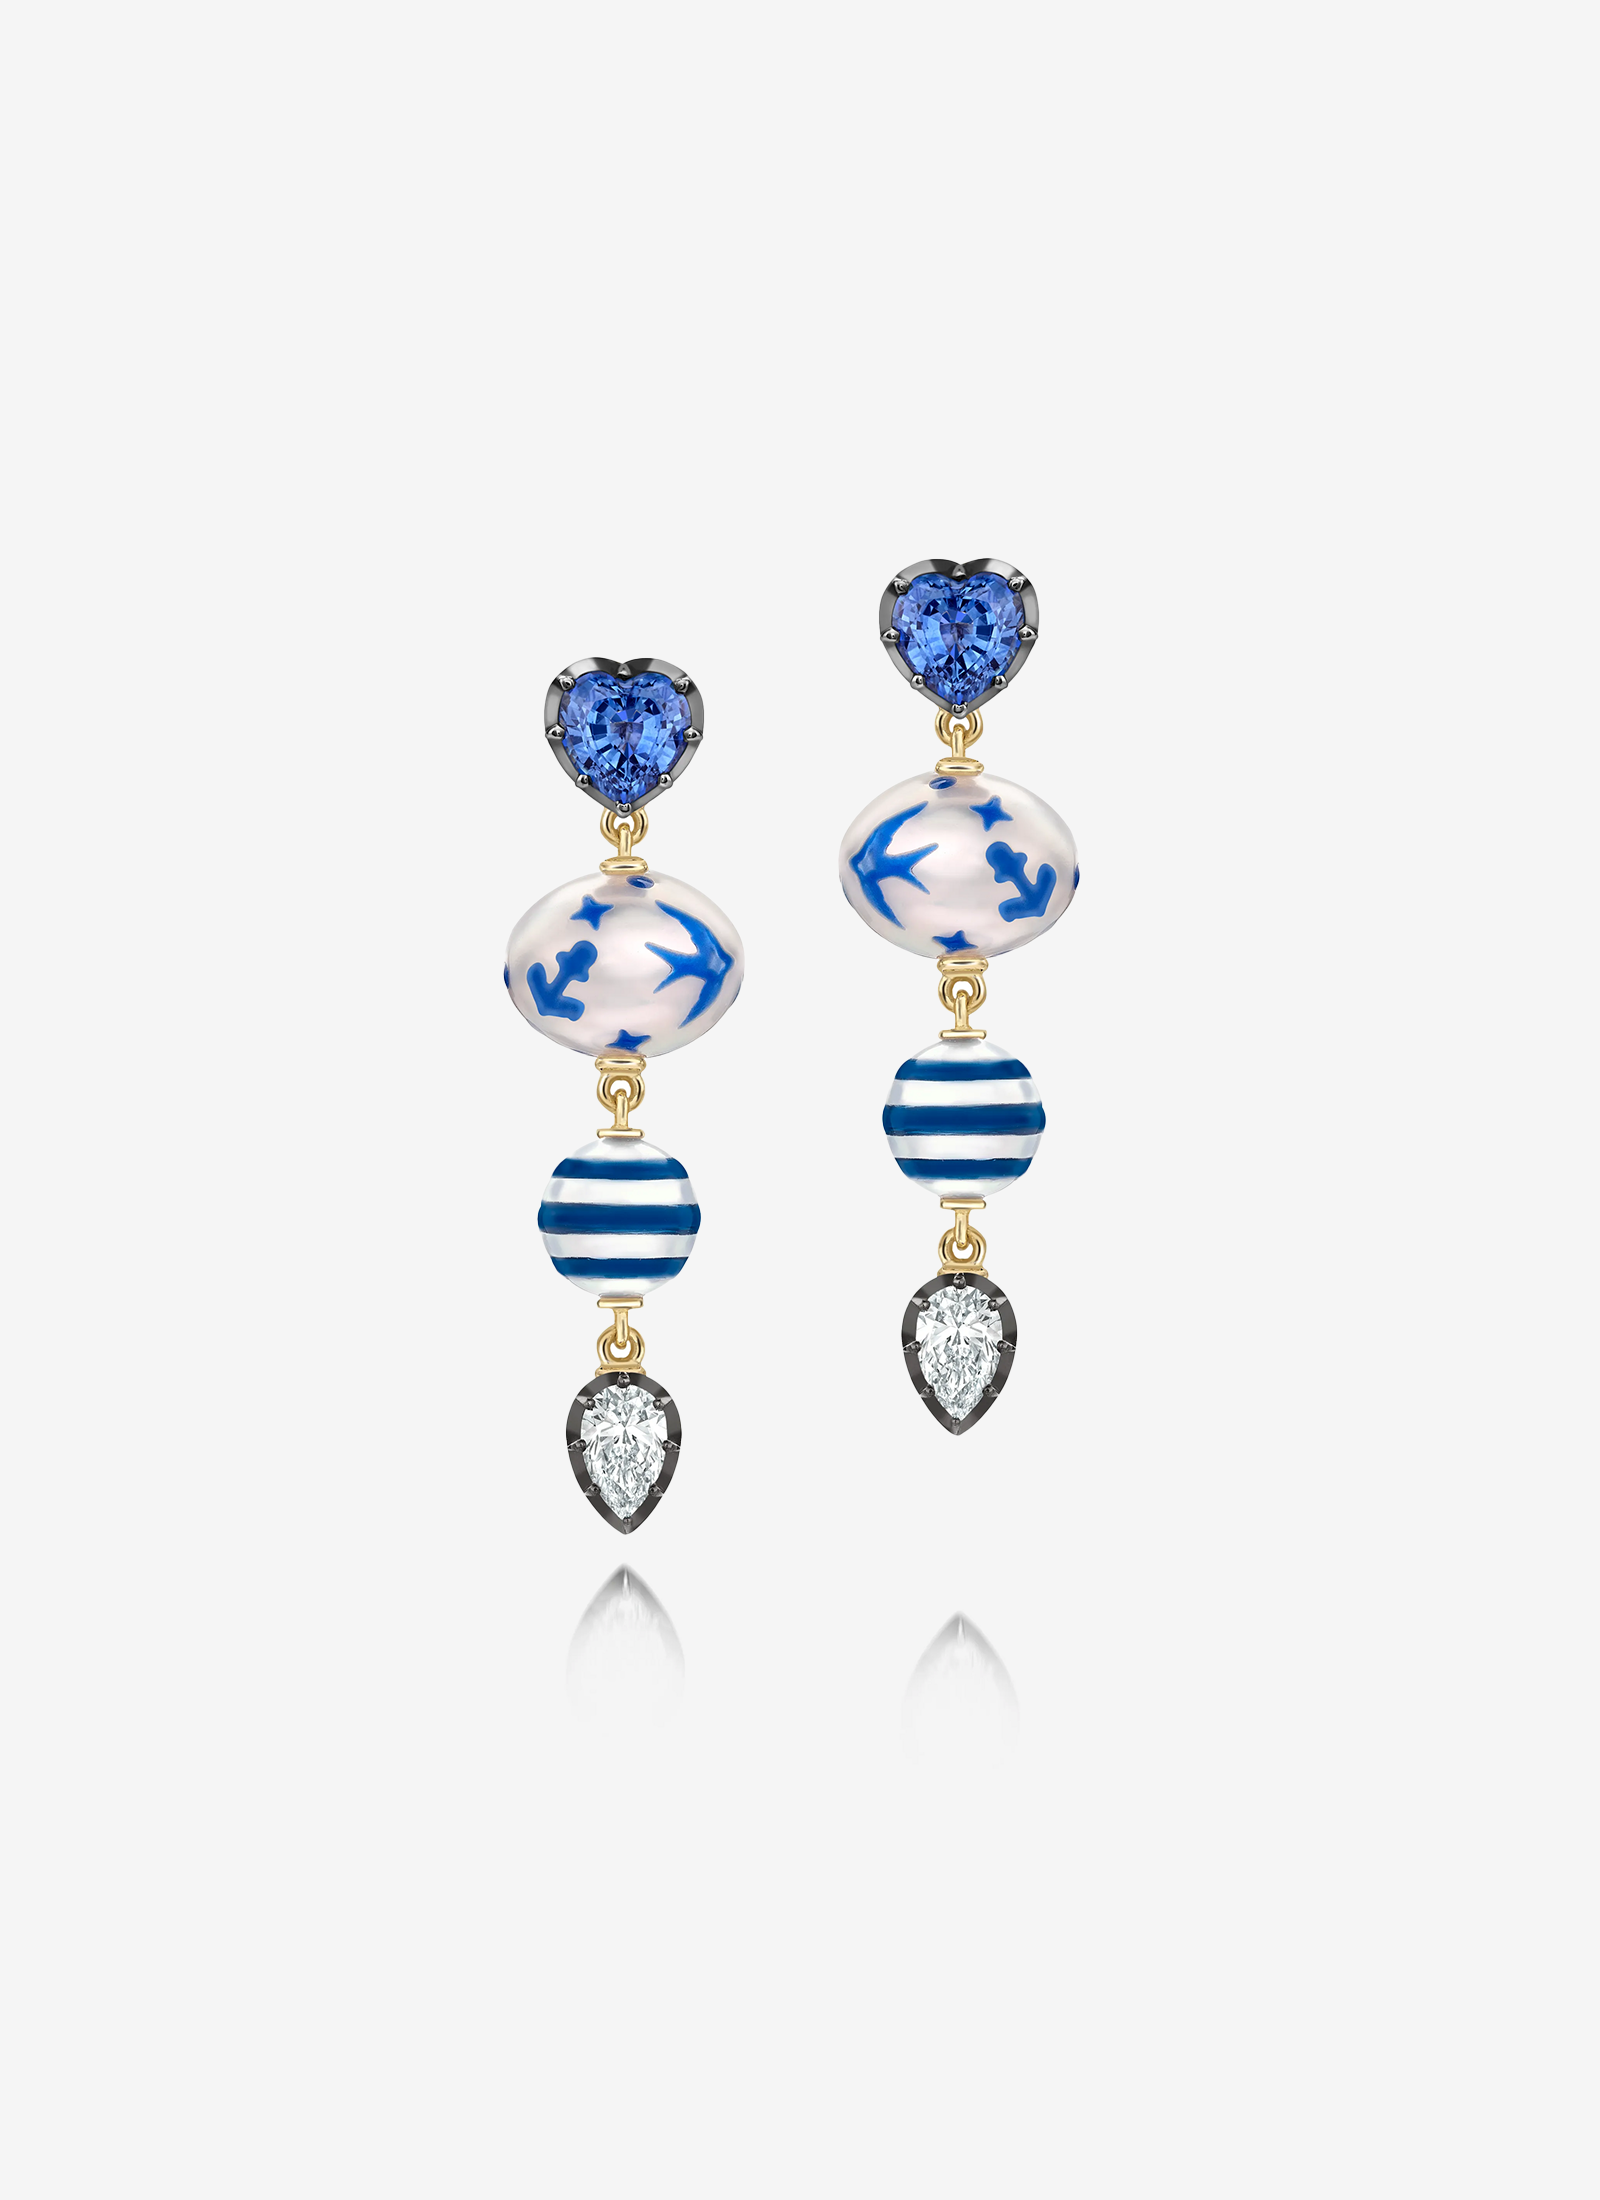 Double Pearl, Diamond and Sapphire Earrings